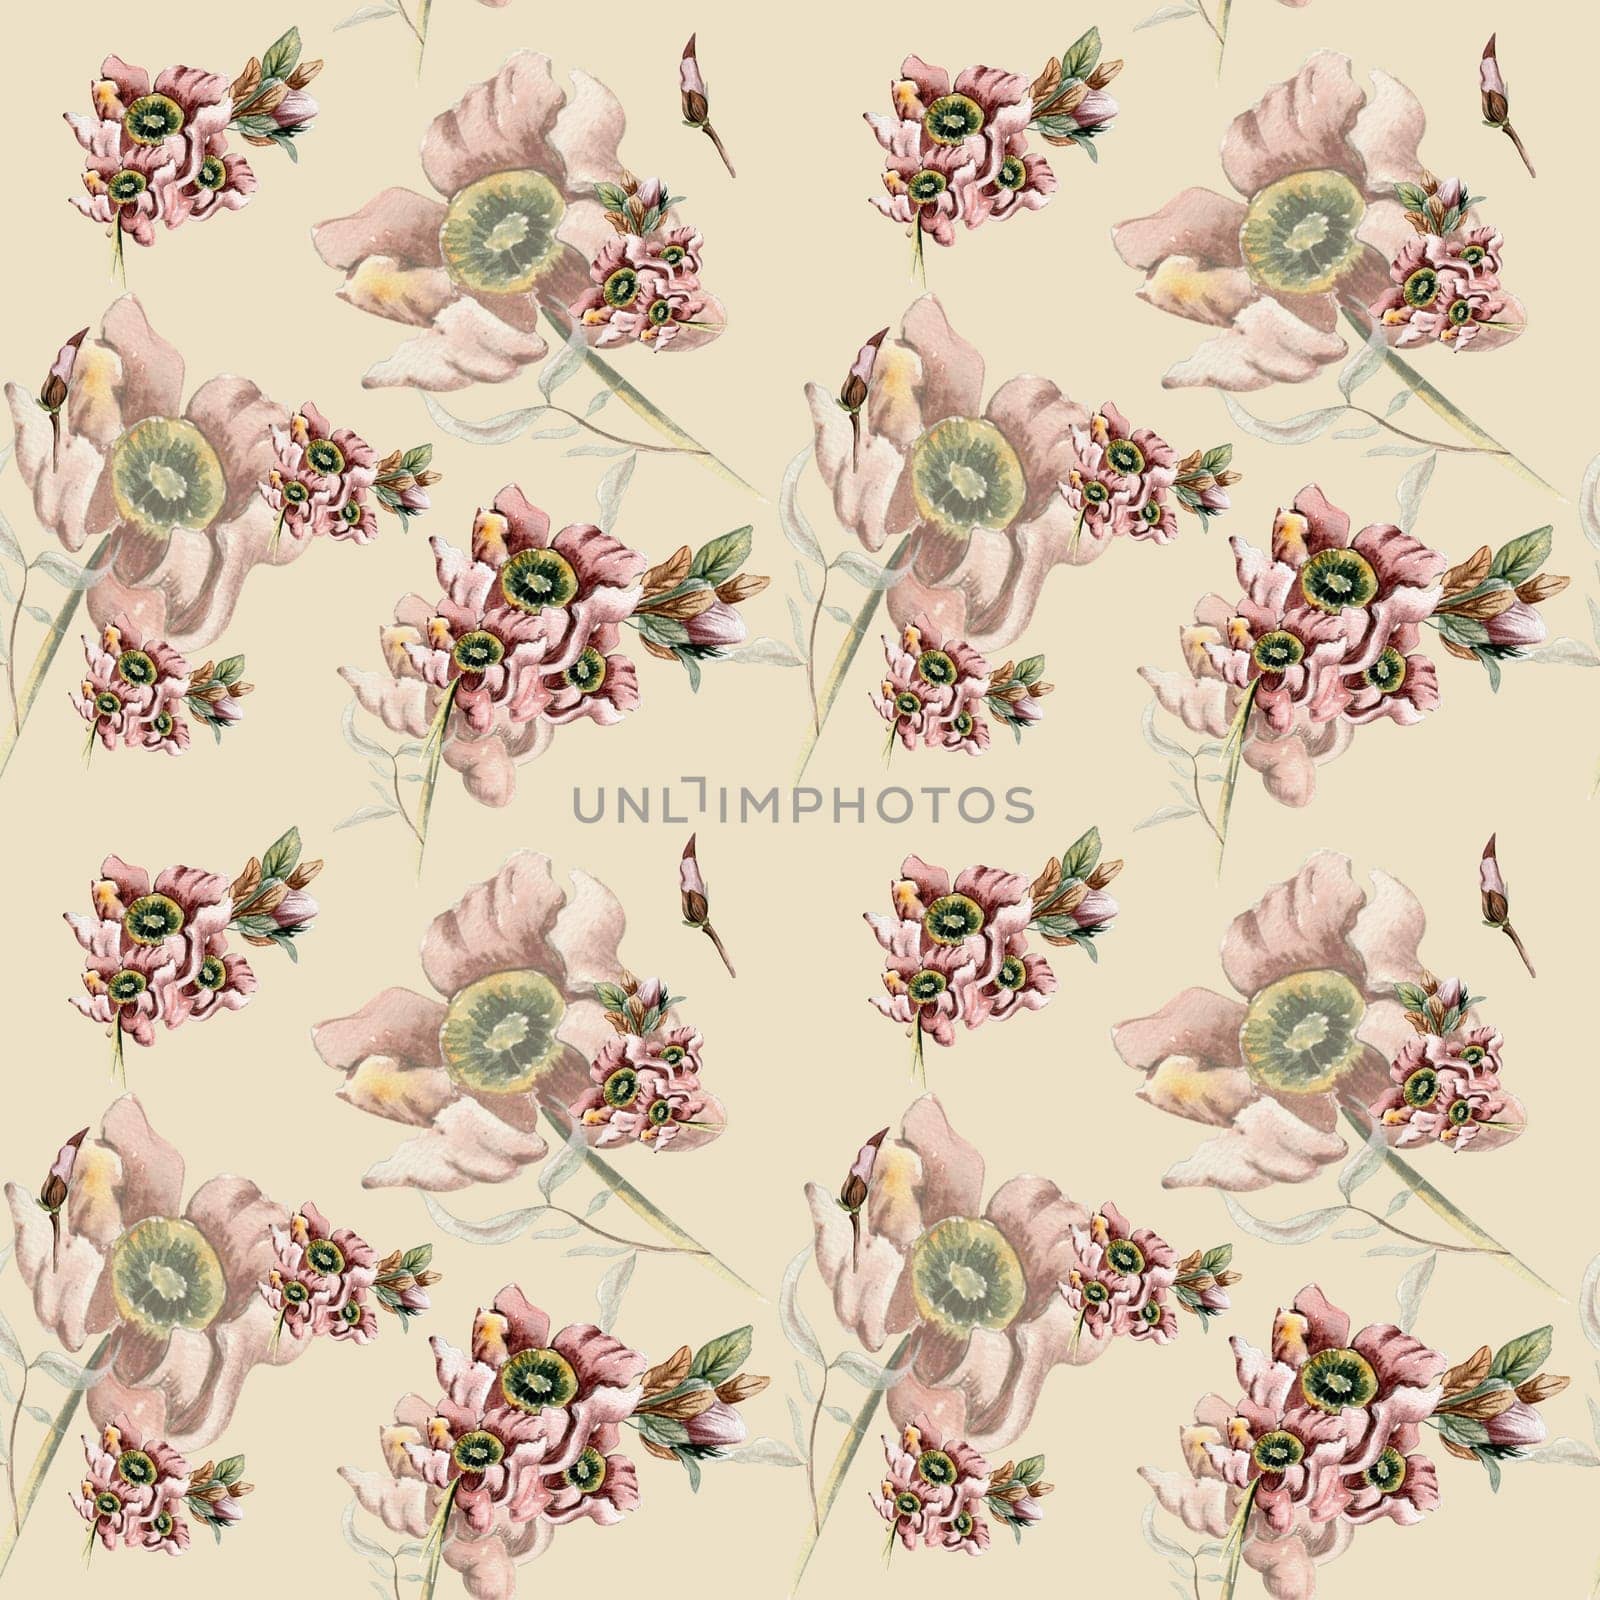 Fall harvest flower seamless pattern. Watercolor fall flowers, leaves and berries . Thanksgiving print.Background with beautiful fall flowers. Applicable for textiles, fabric, decor.